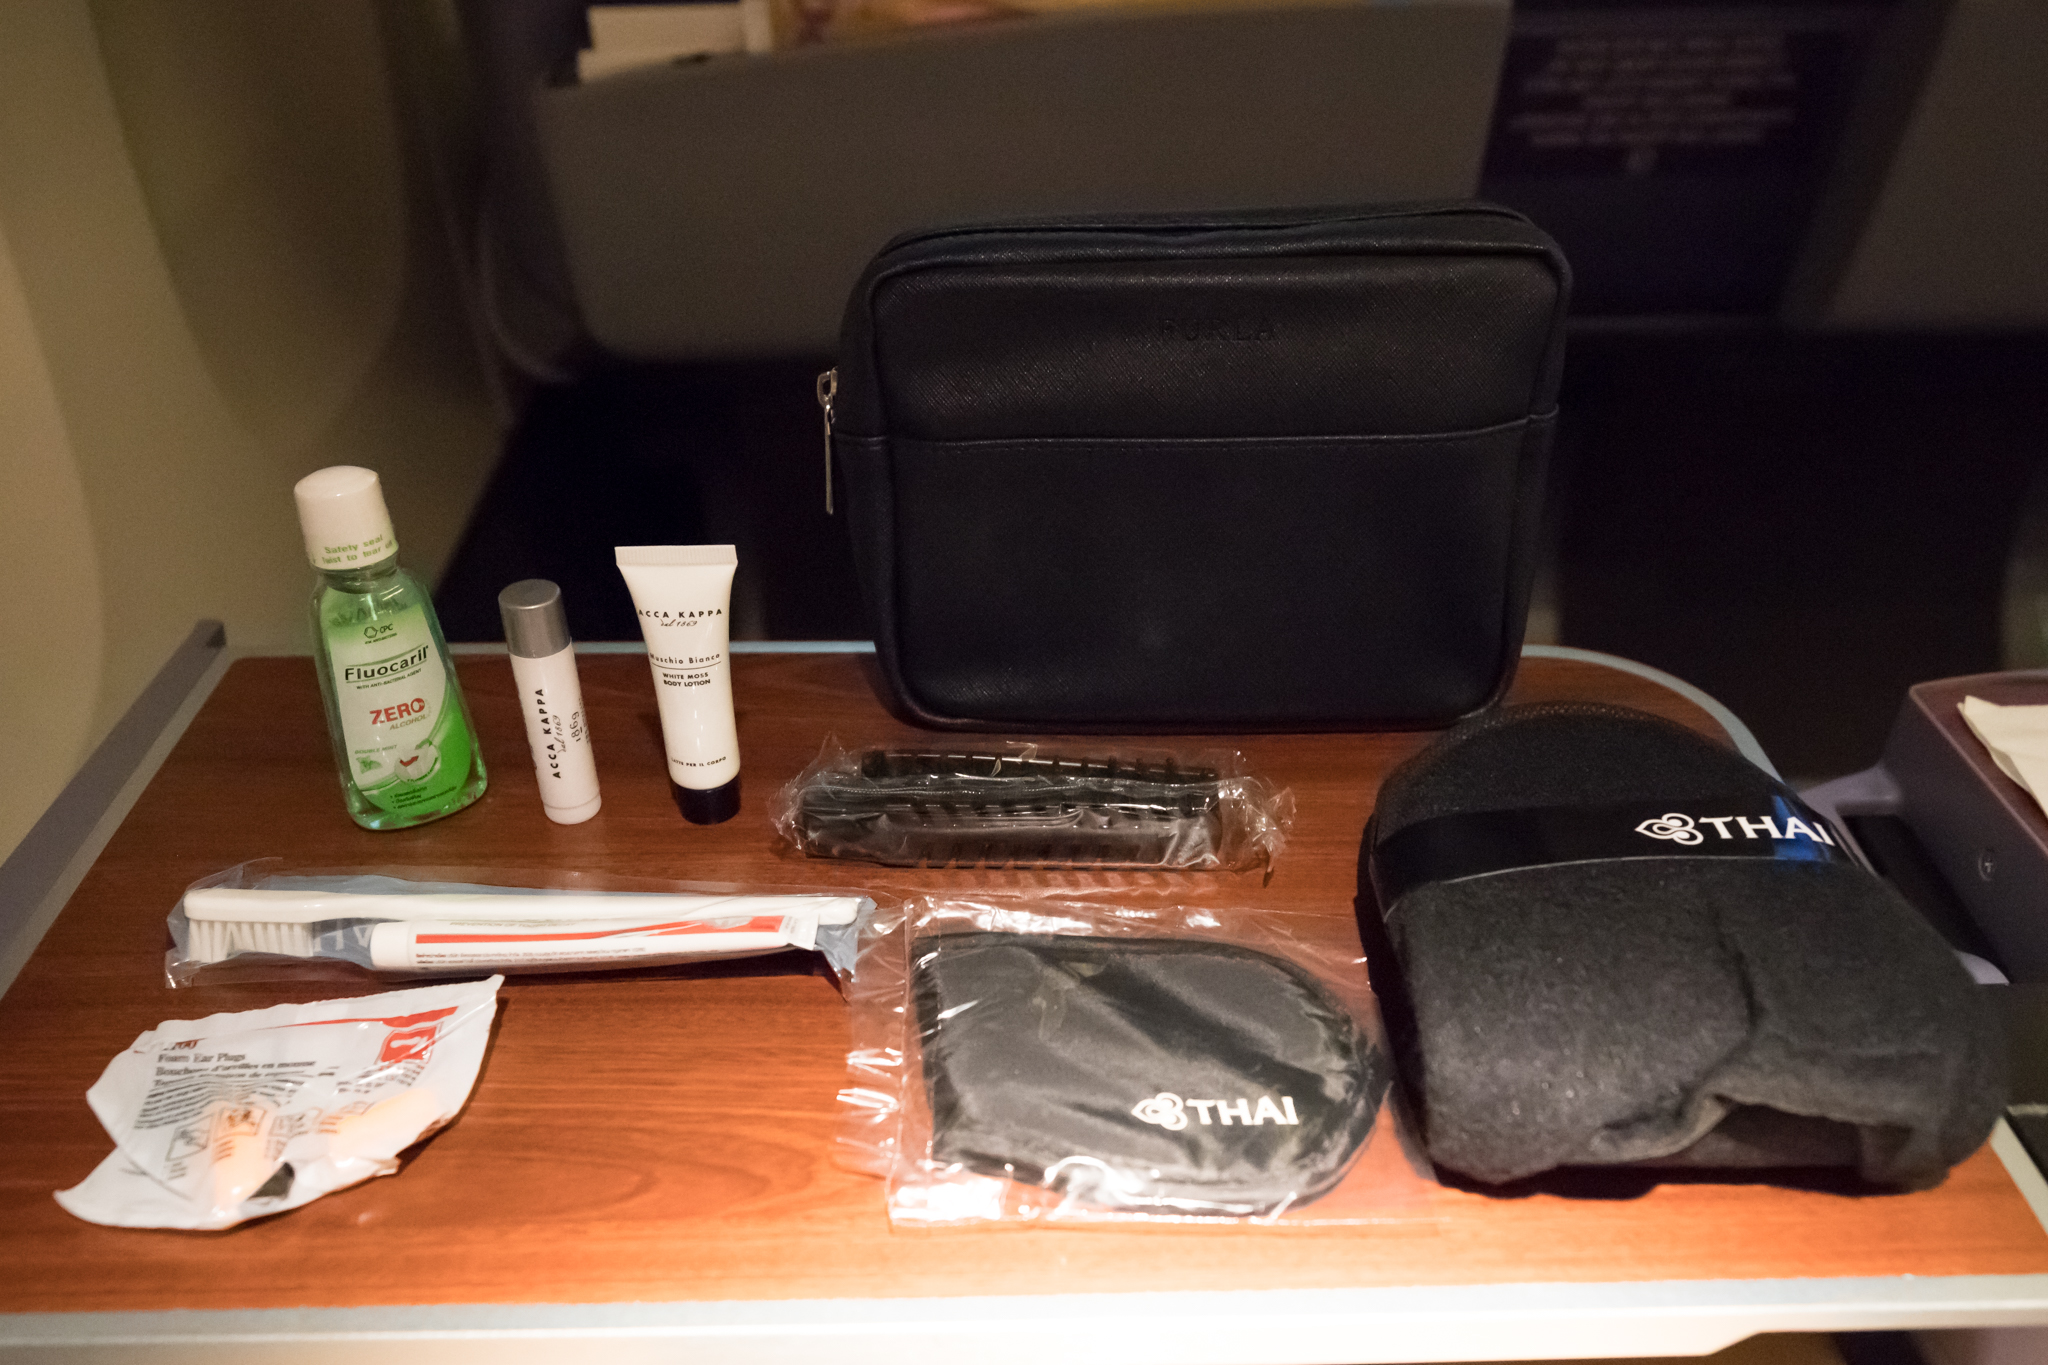 a table with a bag and a small toiletries and a small black bag